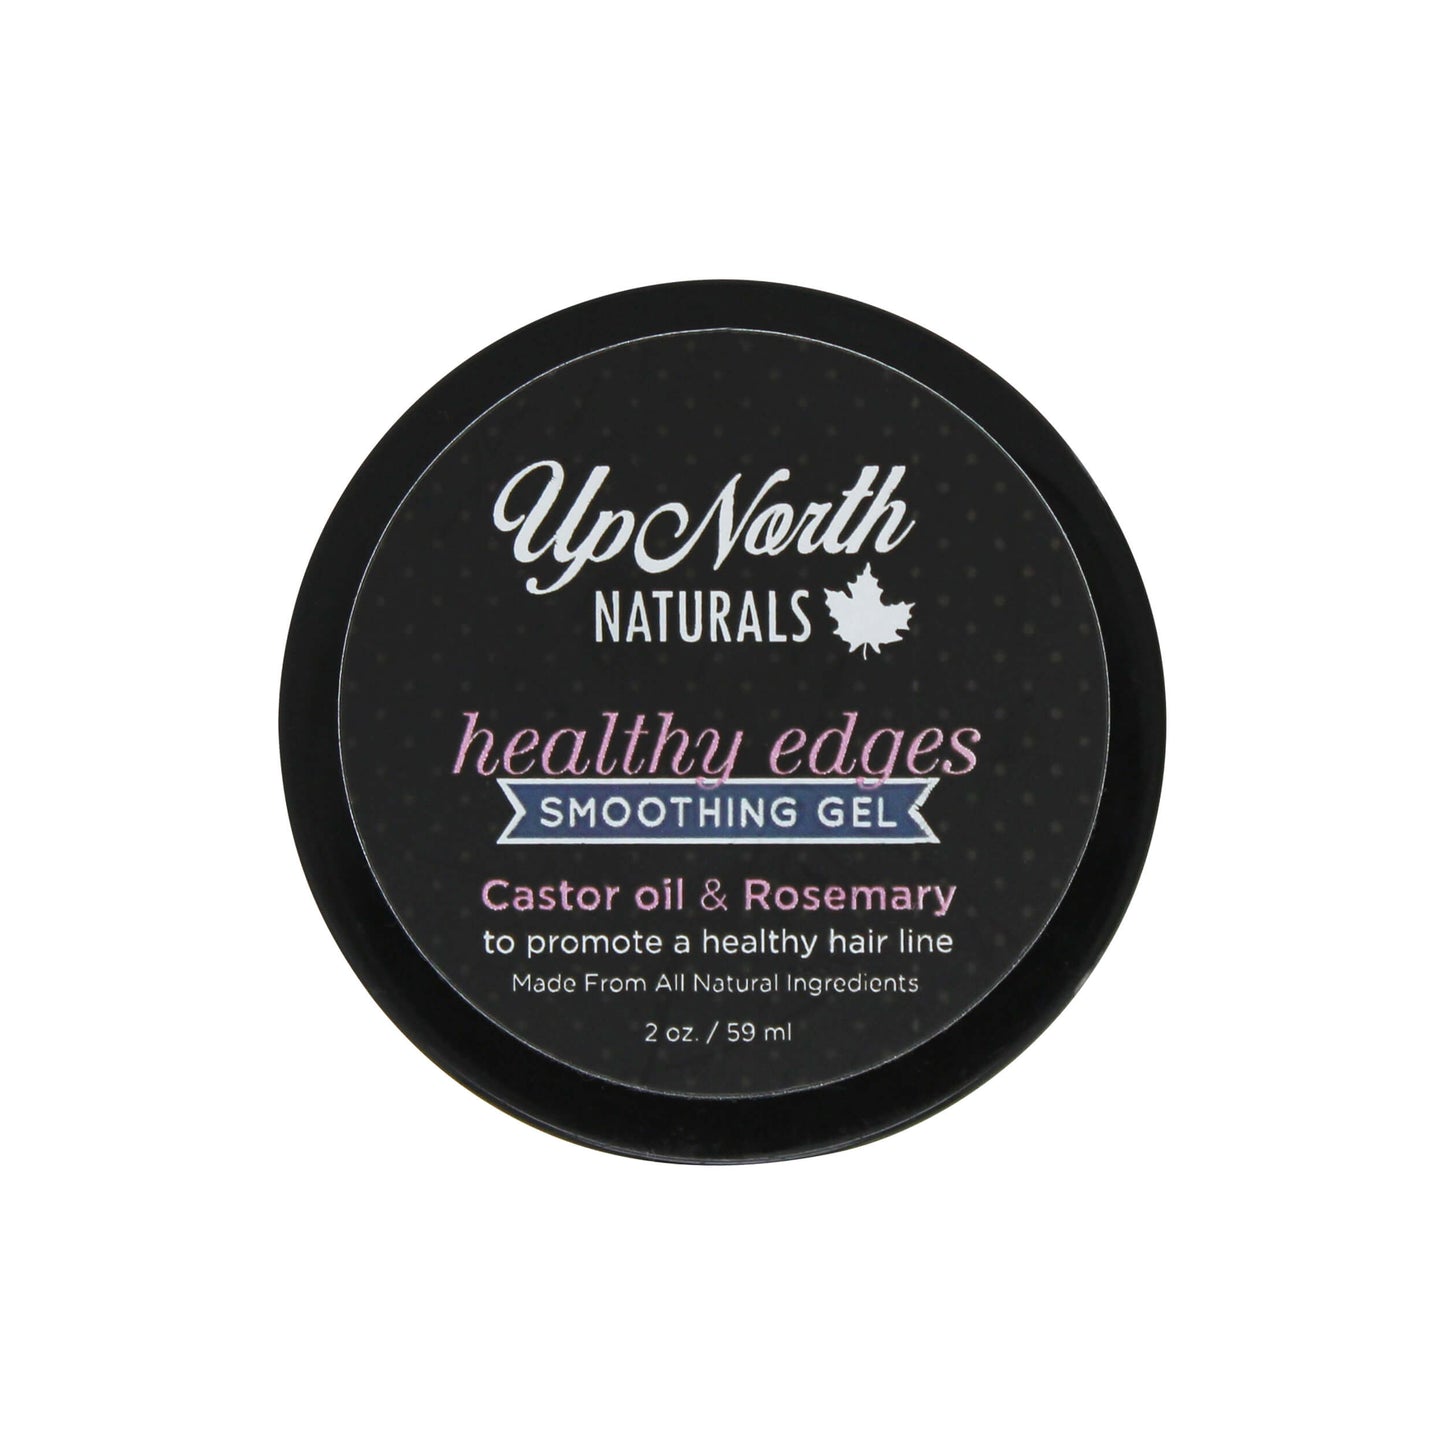 Image of the lid of healthy edges smoothing gel